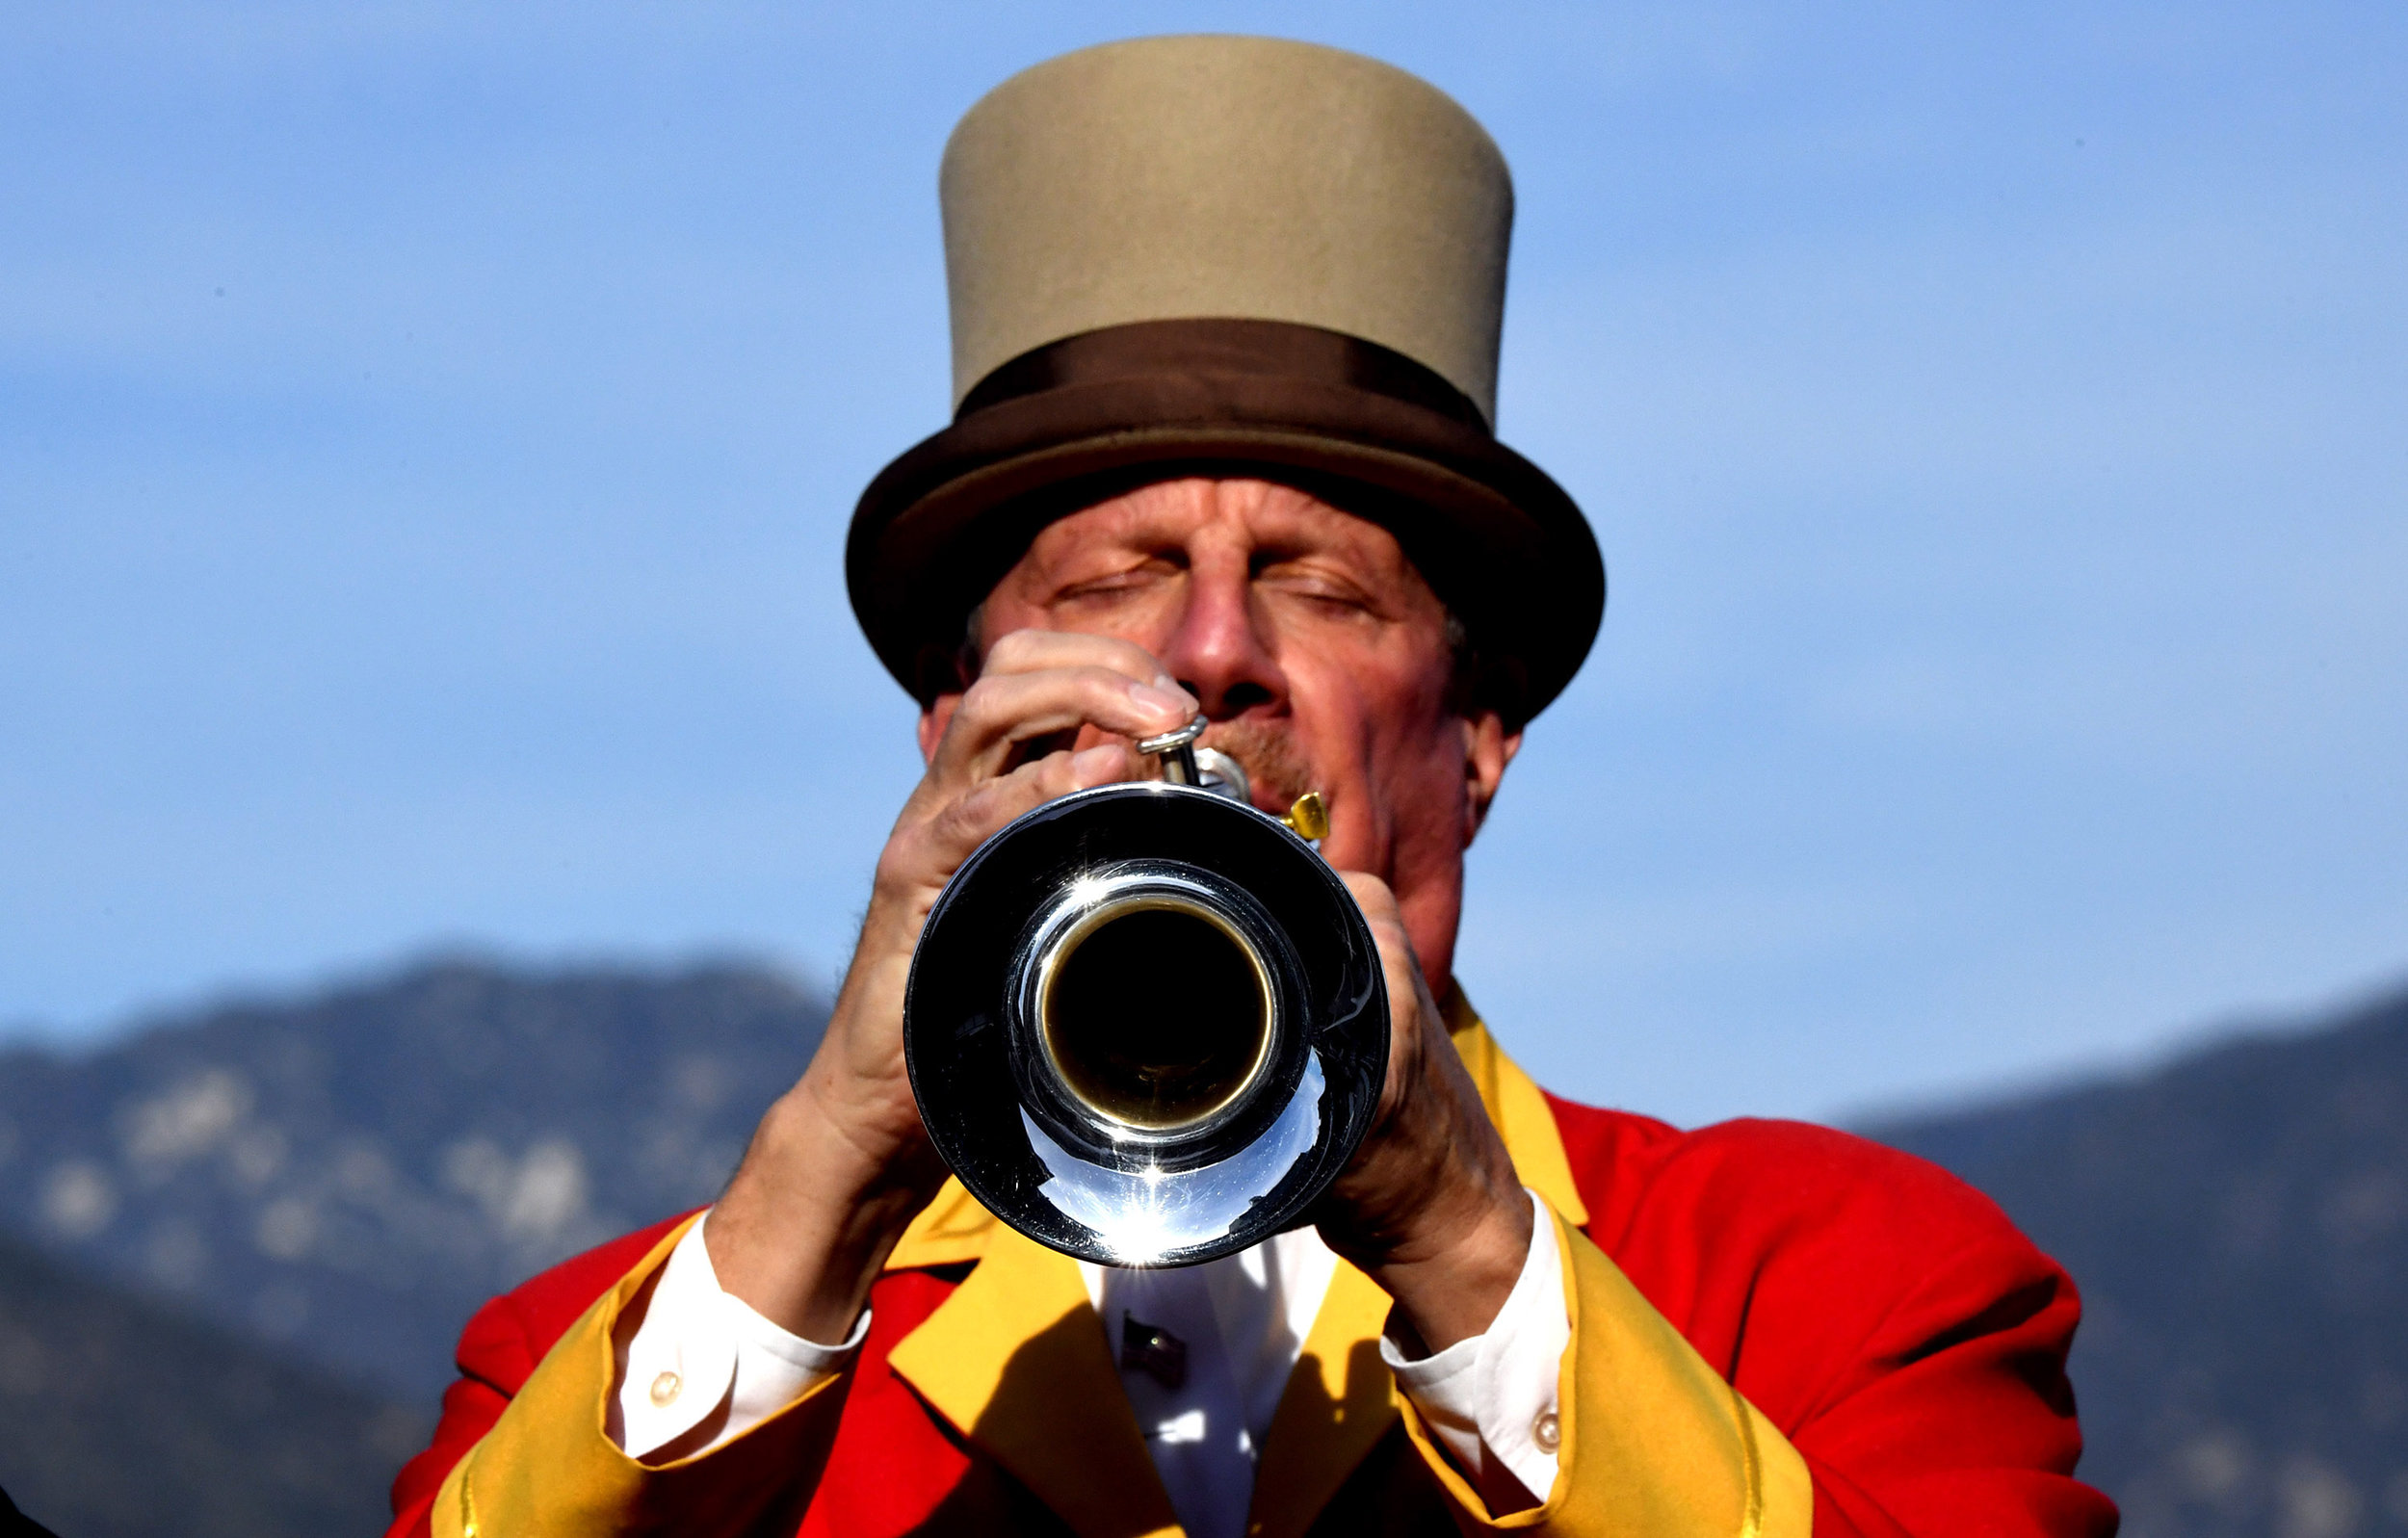  Horn Blower Jay Cohen performs during horse racing at Santa Anita Park on Wednesday, December 26, 2018 in Arcadia, California.  